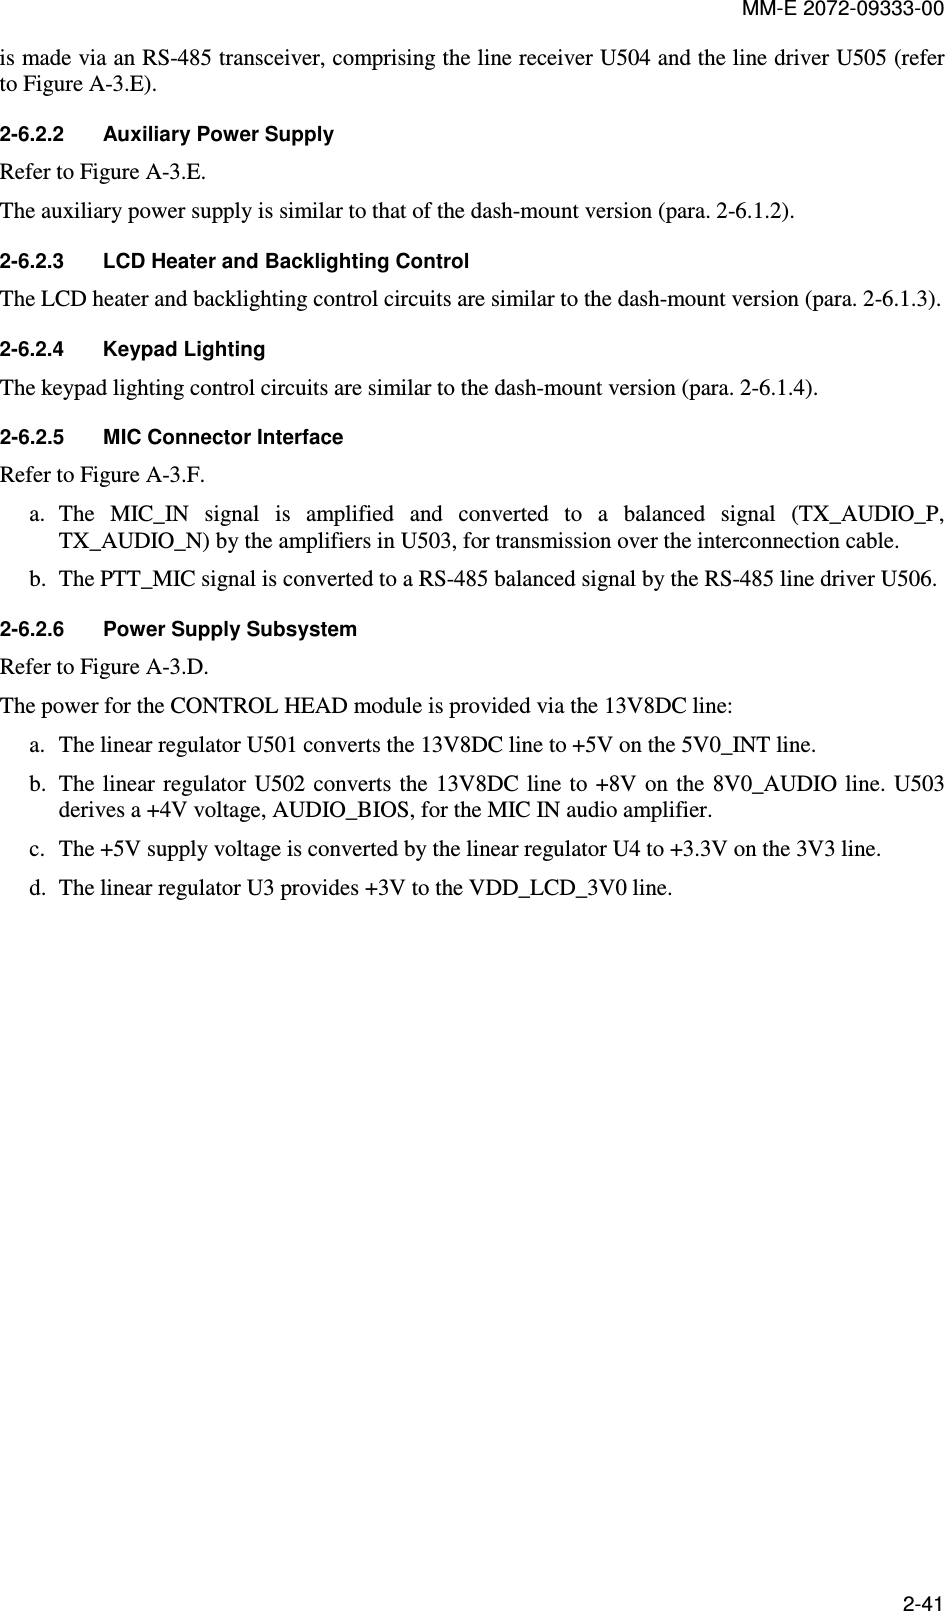 MM-E 2072-09333-00 2-41 is made via an RS-485 transceiver, comprising the line receiver U504 and the line driver U505 (refer to Figure A-3.E). 2-6.2.2  Auxiliary Power Supply Refer to Figure A-3.E. The auxiliary power supply is similar to that of the dash-mount version (para.  2-6.1.2). 2-6.2.3  LCD Heater and Backlighting Control The LCD heater and backlighting control circuits are similar to the dash-mount version (para.  2-6.1.3). 2-6.2.4  Keypad Lighting     The keypad lighting control circuits are similar to the dash-mount version (para.  2-6.1.4). 2-6.2.5  MIC Connector Interface Refer to Figure A-3.F. a. The  MIC_IN  signal  is  amplified  and  converted  to  a  balanced  signal  (TX_AUDIO_P, TX_AUDIO_N) by the amplifiers in U503, for transmission over the interconnection cable. b. The PTT_MIC signal is converted to a RS-485 balanced signal by the RS-485 line driver U506. 2-6.2.6  Power Supply Subsystem Refer to Figure A-3.D. The power for the CONTROL HEAD module is provided via the 13V8DC line: a. The linear regulator U501 converts the 13V8DC line to +5V on the 5V0_INT line. b. The linear regulator  U502 converts the  13V8DC line to +8V on  the  8V0_AUDIO line.  U503 derives a +4V voltage, AUDIO_BIOS, for the MIC IN audio amplifier. c. The +5V supply voltage is converted by the linear regulator U4 to +3.3V on the 3V3 line. d. The linear regulator U3 provides +3V to the VDD_LCD_3V0 line.  